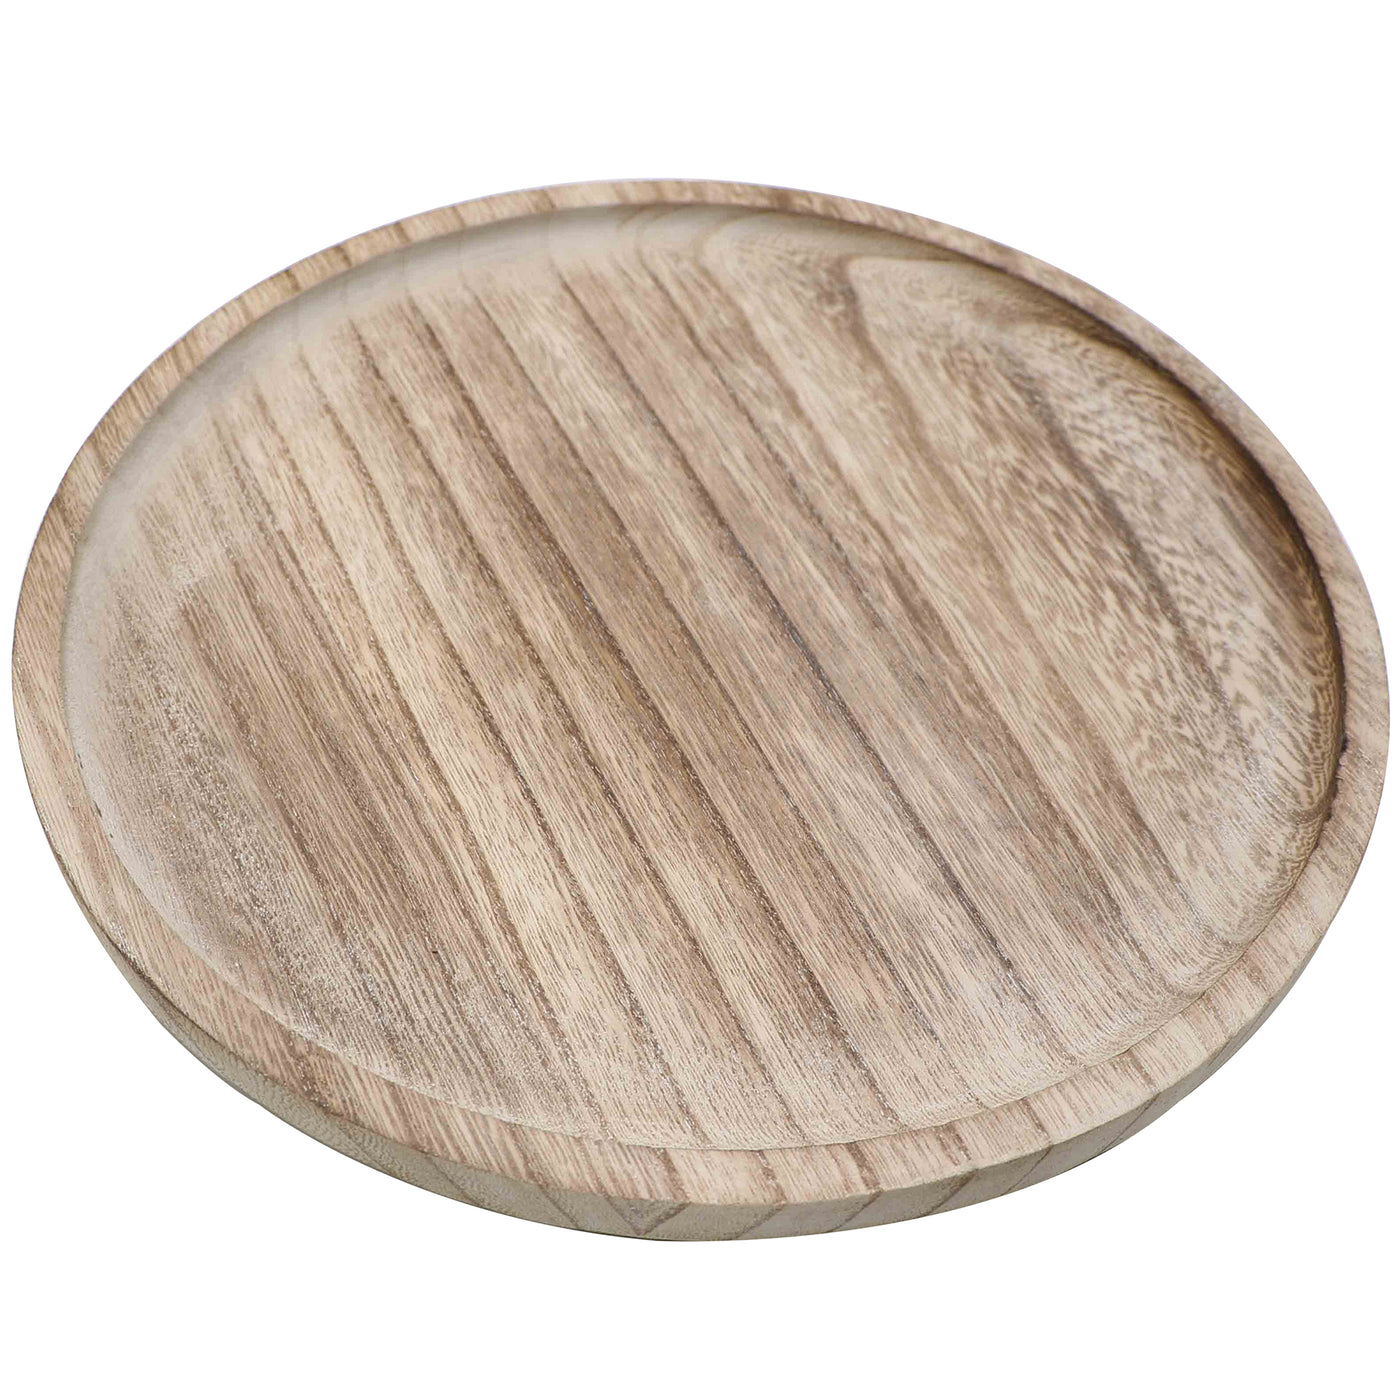 Sweet Water Decor Large Rustic Round Wood Tray - 10x10